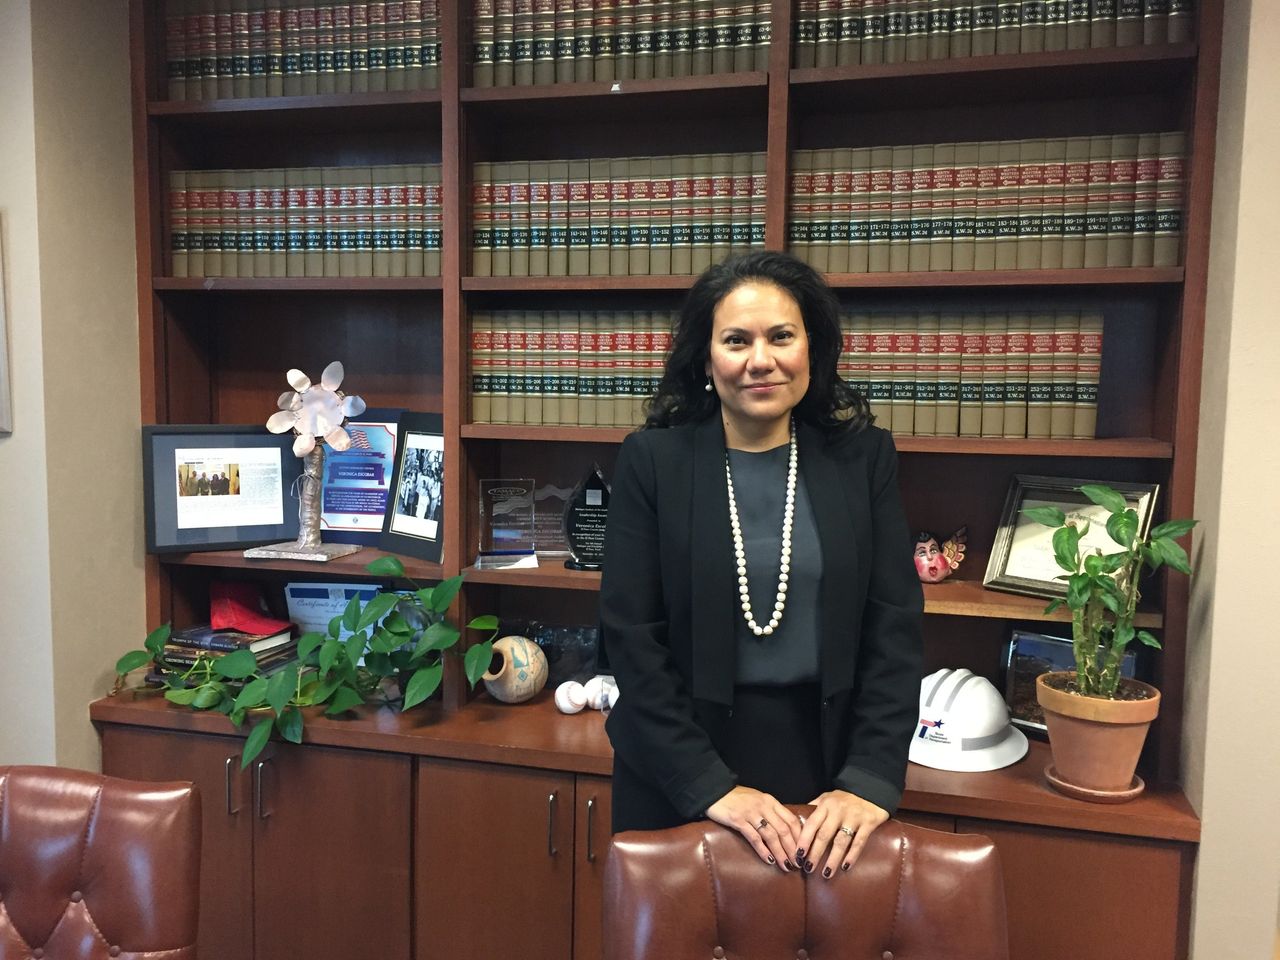 Then-Judge Veronica Escobar poses in her office in November 2016.